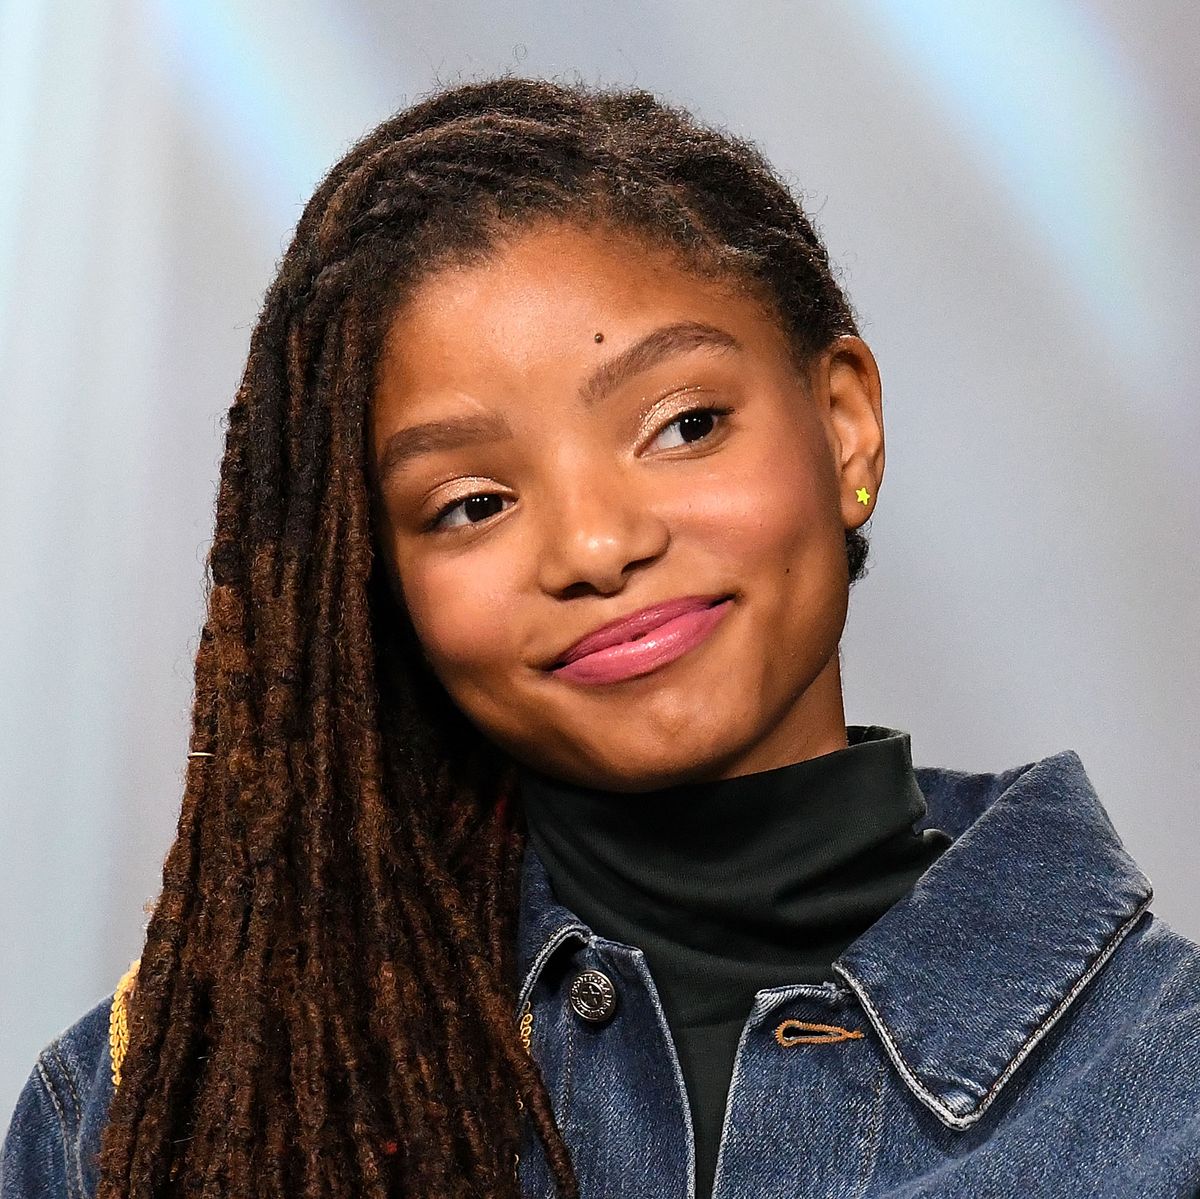 halle-bailey-of-r-b-duo-chloe-x-halle-visits-build-to-news-photo-875526188-1562600090.jpg?crop=0.662xw:1.00xh;0.199xw,0.00242xh&resize=1200:*